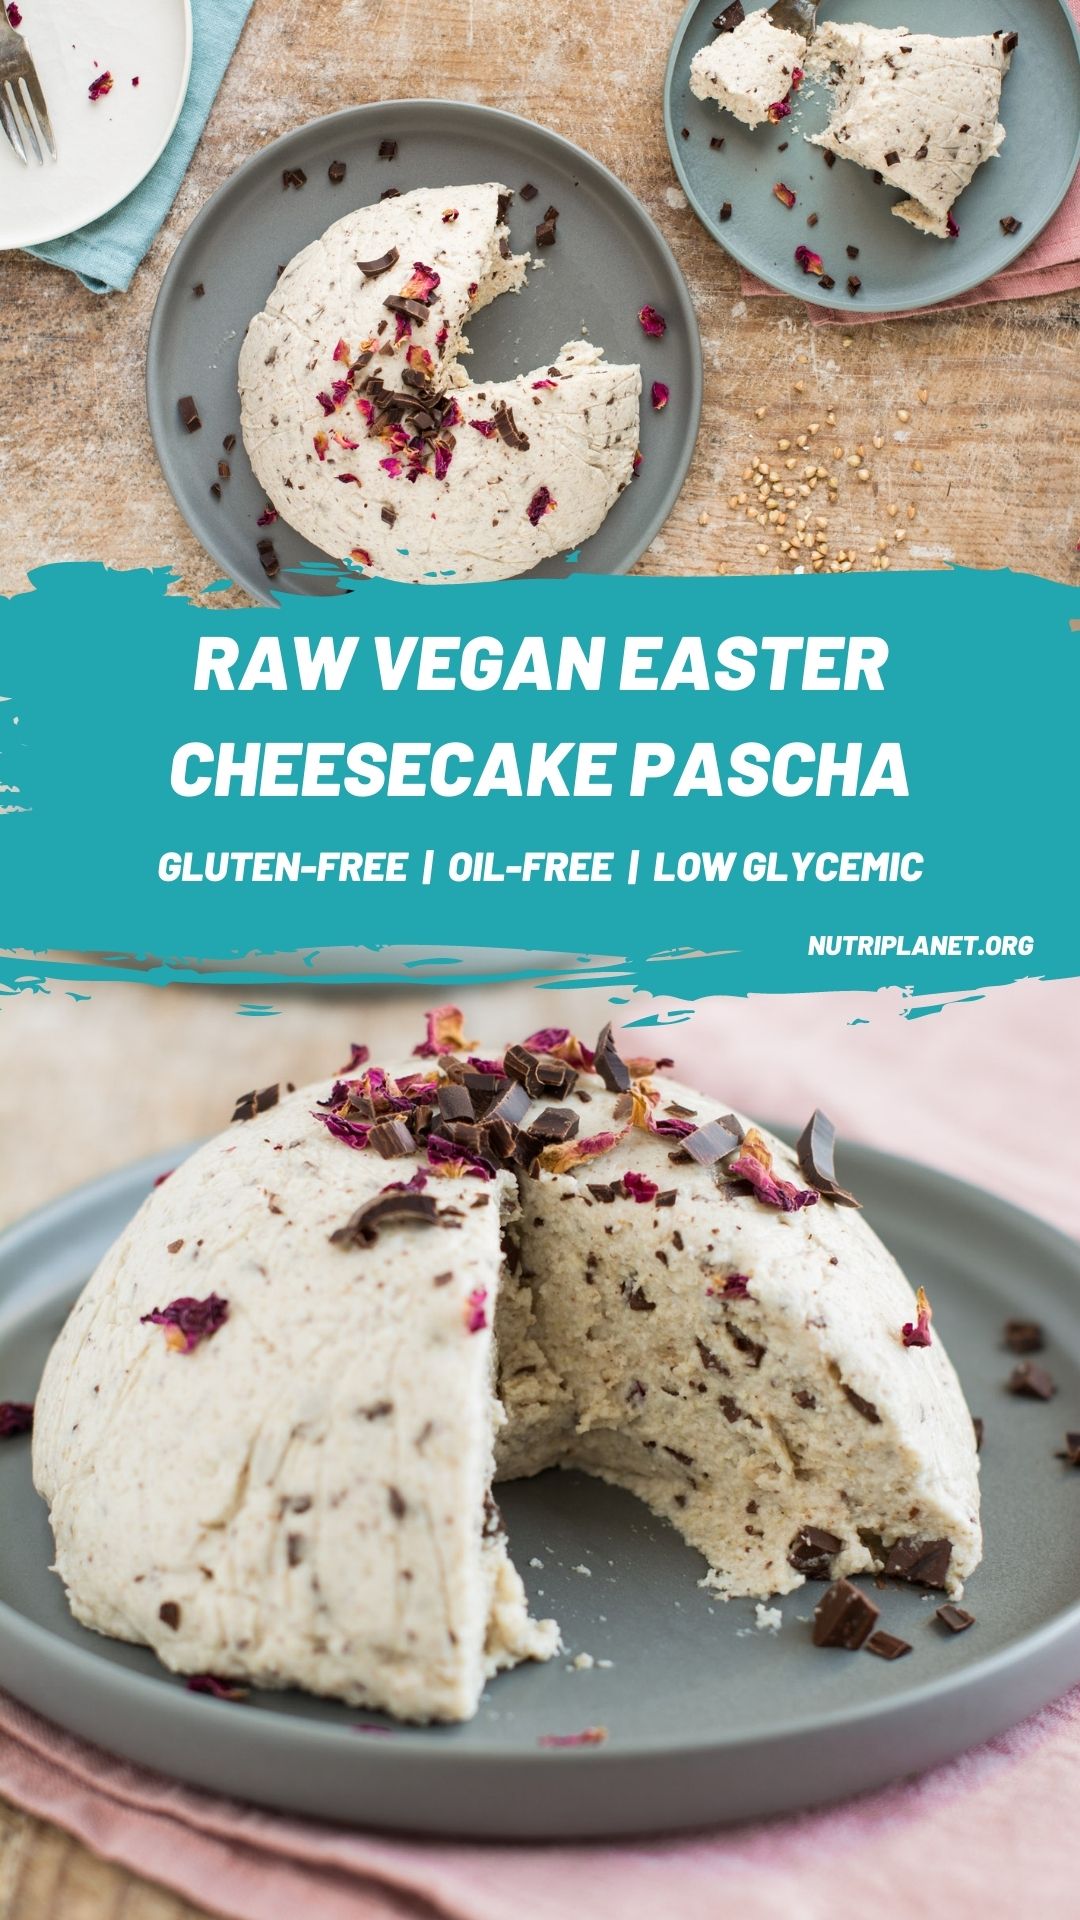 Learn how to make healthy dessert for Easter that is gluten-free and oil-free vegan cheesecake. 